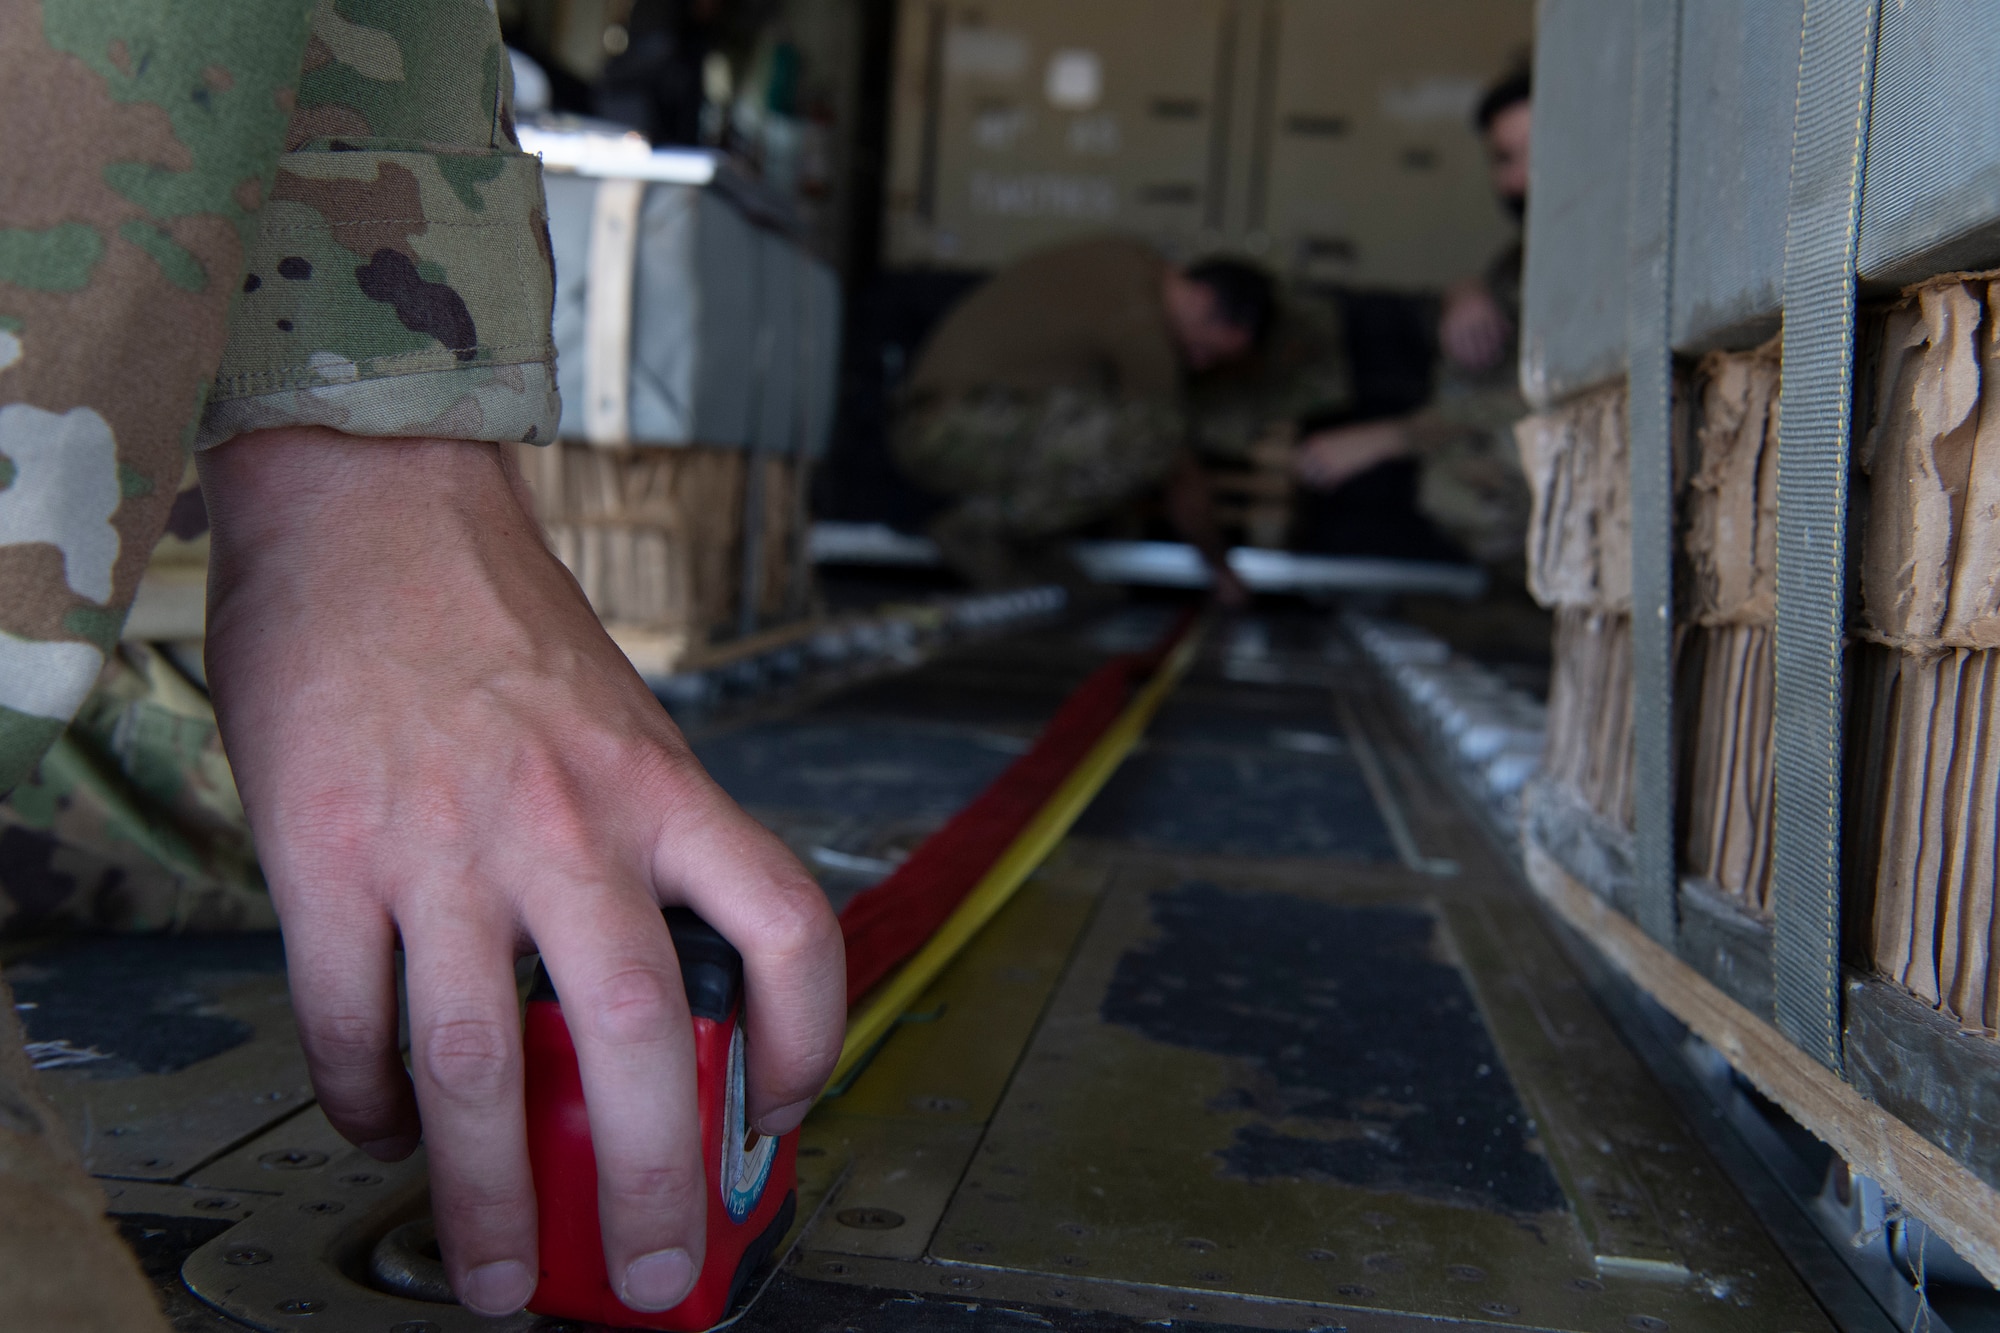 Airman 1st Class Cameron Bou, 41st Airlift Squadron loadmaster, prepares a C-130J Super Hercules for loading operations during pre-deployment training at Montrose Regional Airport, Colorado, July 27, 2020. This training is part of the 4/12 deployment initiative, which was developed in 2019 between airlift squadrons from Dyess Air Force Base, Texas and Little Rock AFB, allowing each squadron a full year of dwell time followed by a four-month rotation to their respective area of responsibility. (U.S. Air Force photo by Airman 1st Class Aaron Irvin)